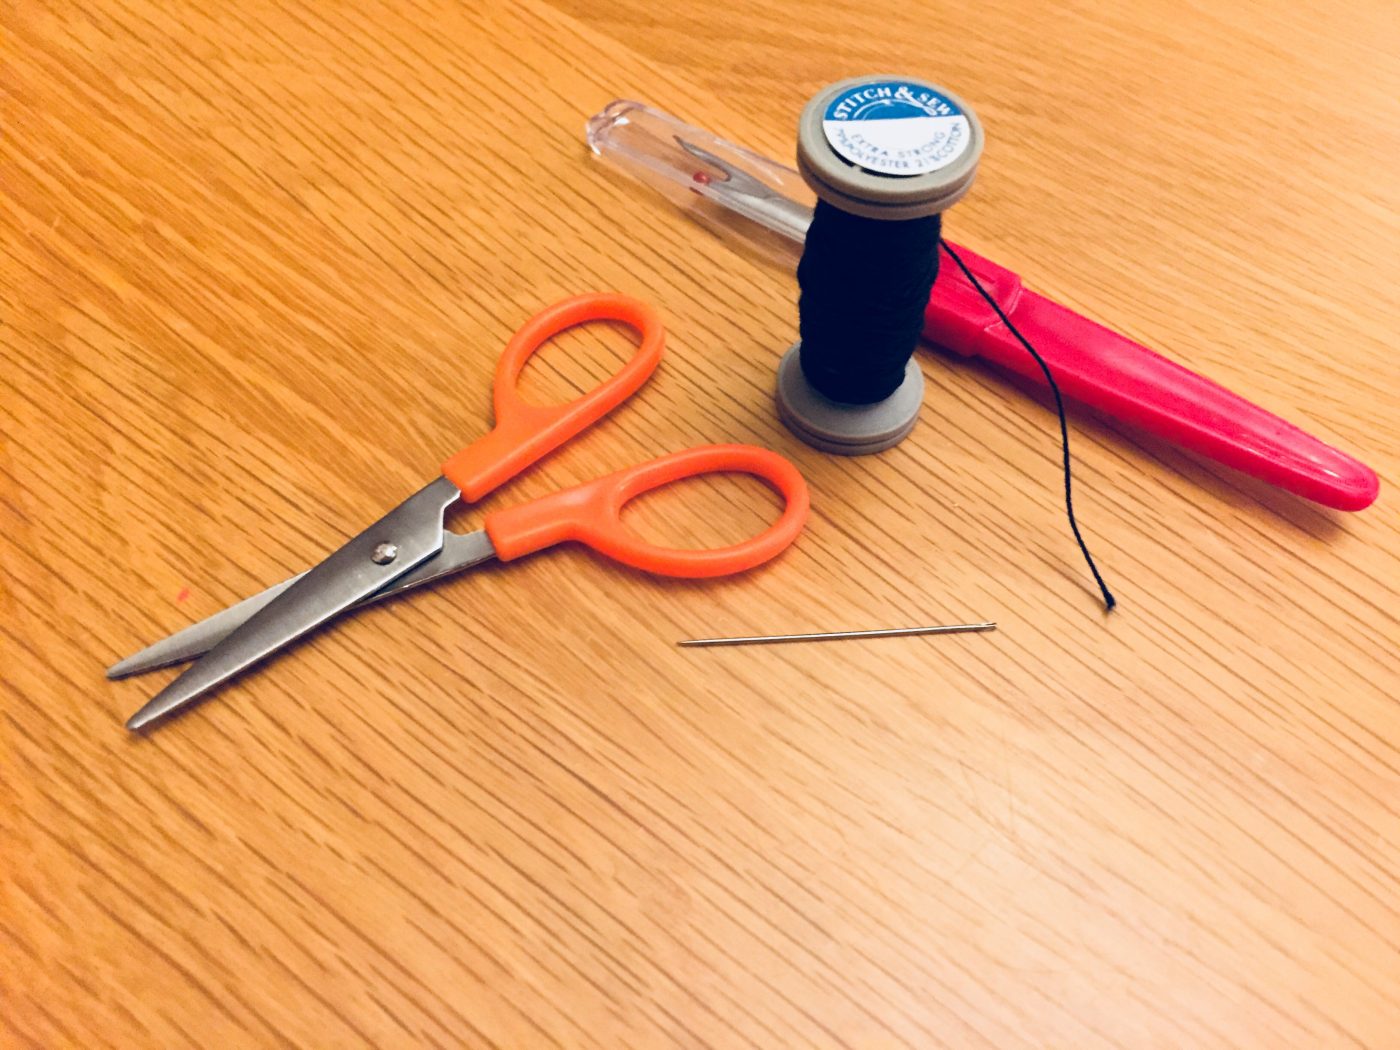 Sewing scissors, needle and thread